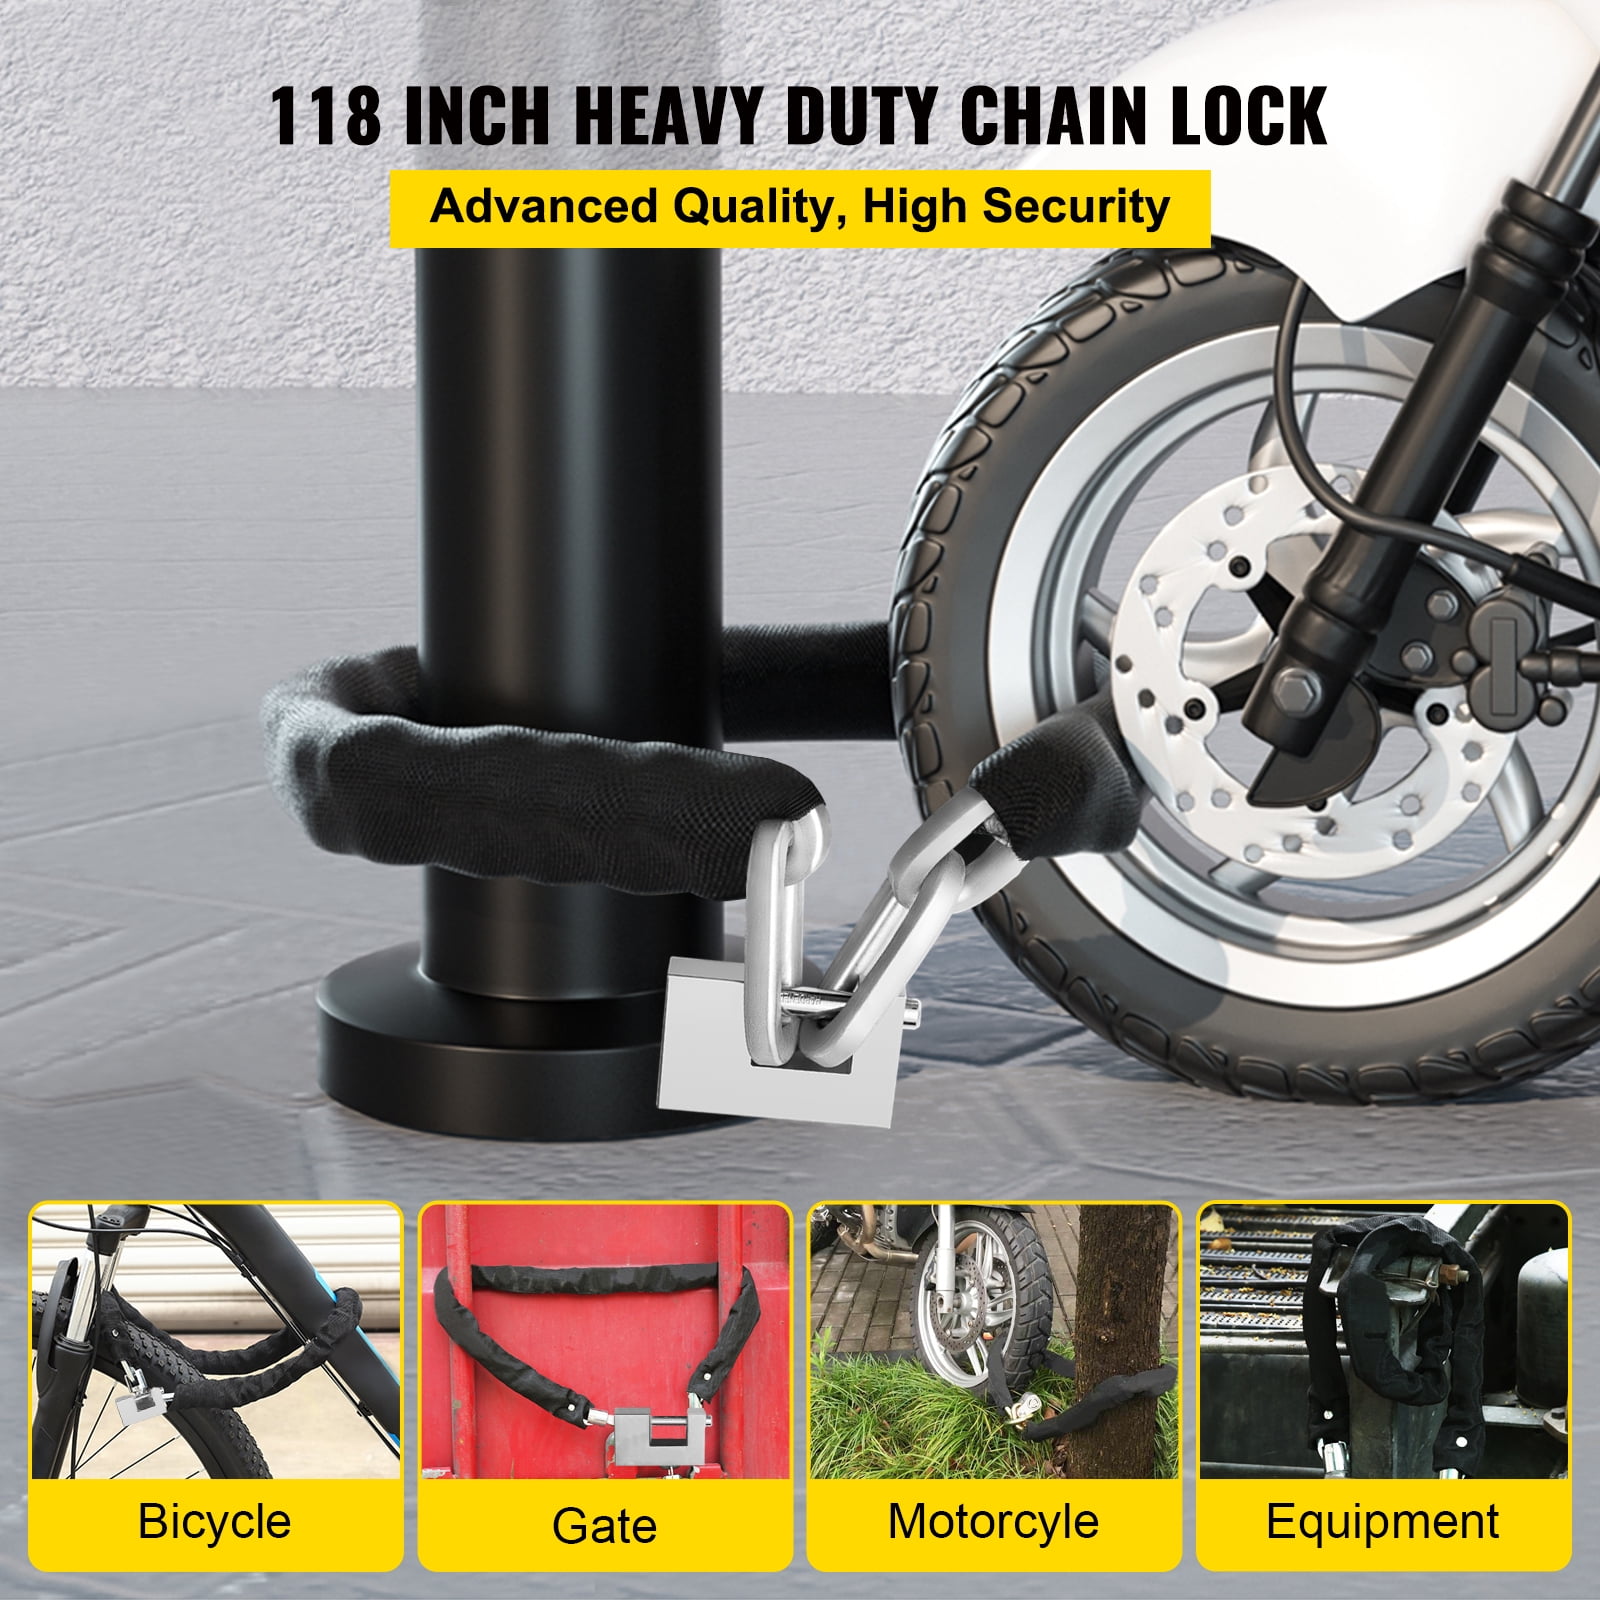 WANLIAN Security Chain and Lock Kit, Duty Steel Chain Lock- Fit for  Motorcycles, Bikes, Scooter,Trucks, Helmets, Boats, Gates and Fences  (8x800mm)